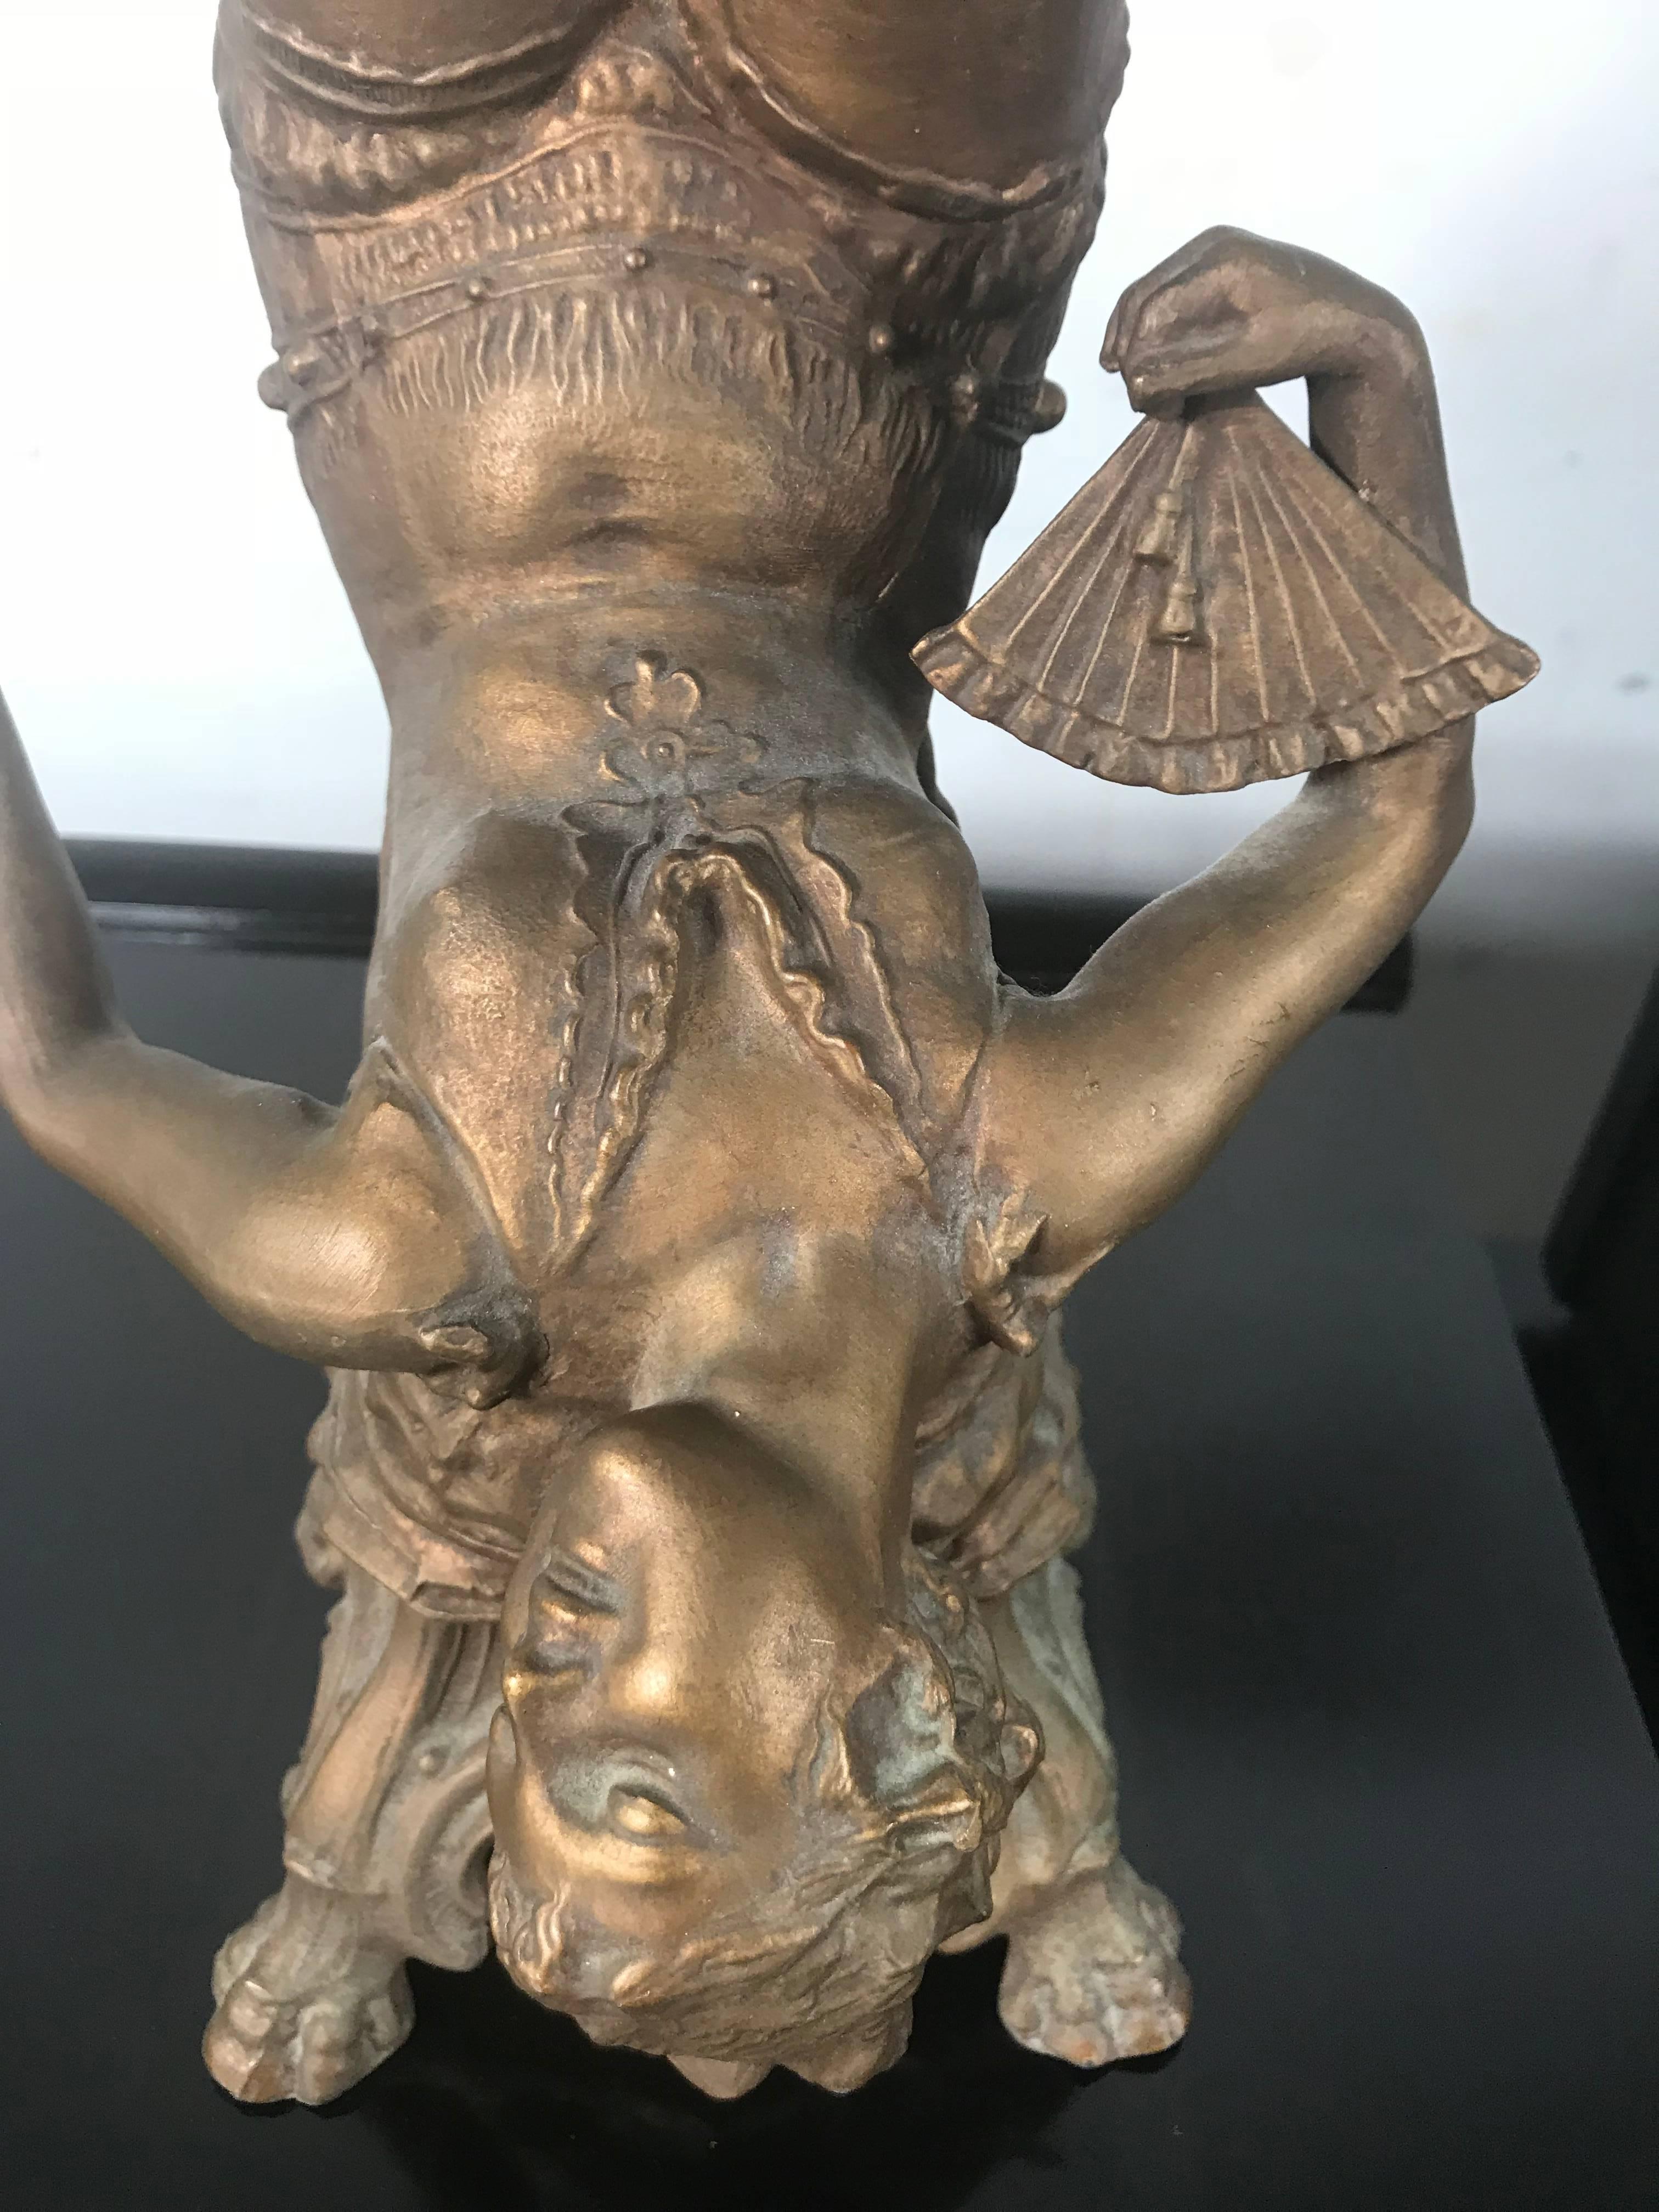 Art Deco figural lamp with original glass nugget shade, upside down woman flapper girl, amazing details, beautiful bronzed patina, retains original multi-color chunk nugget glass shade, shade 8